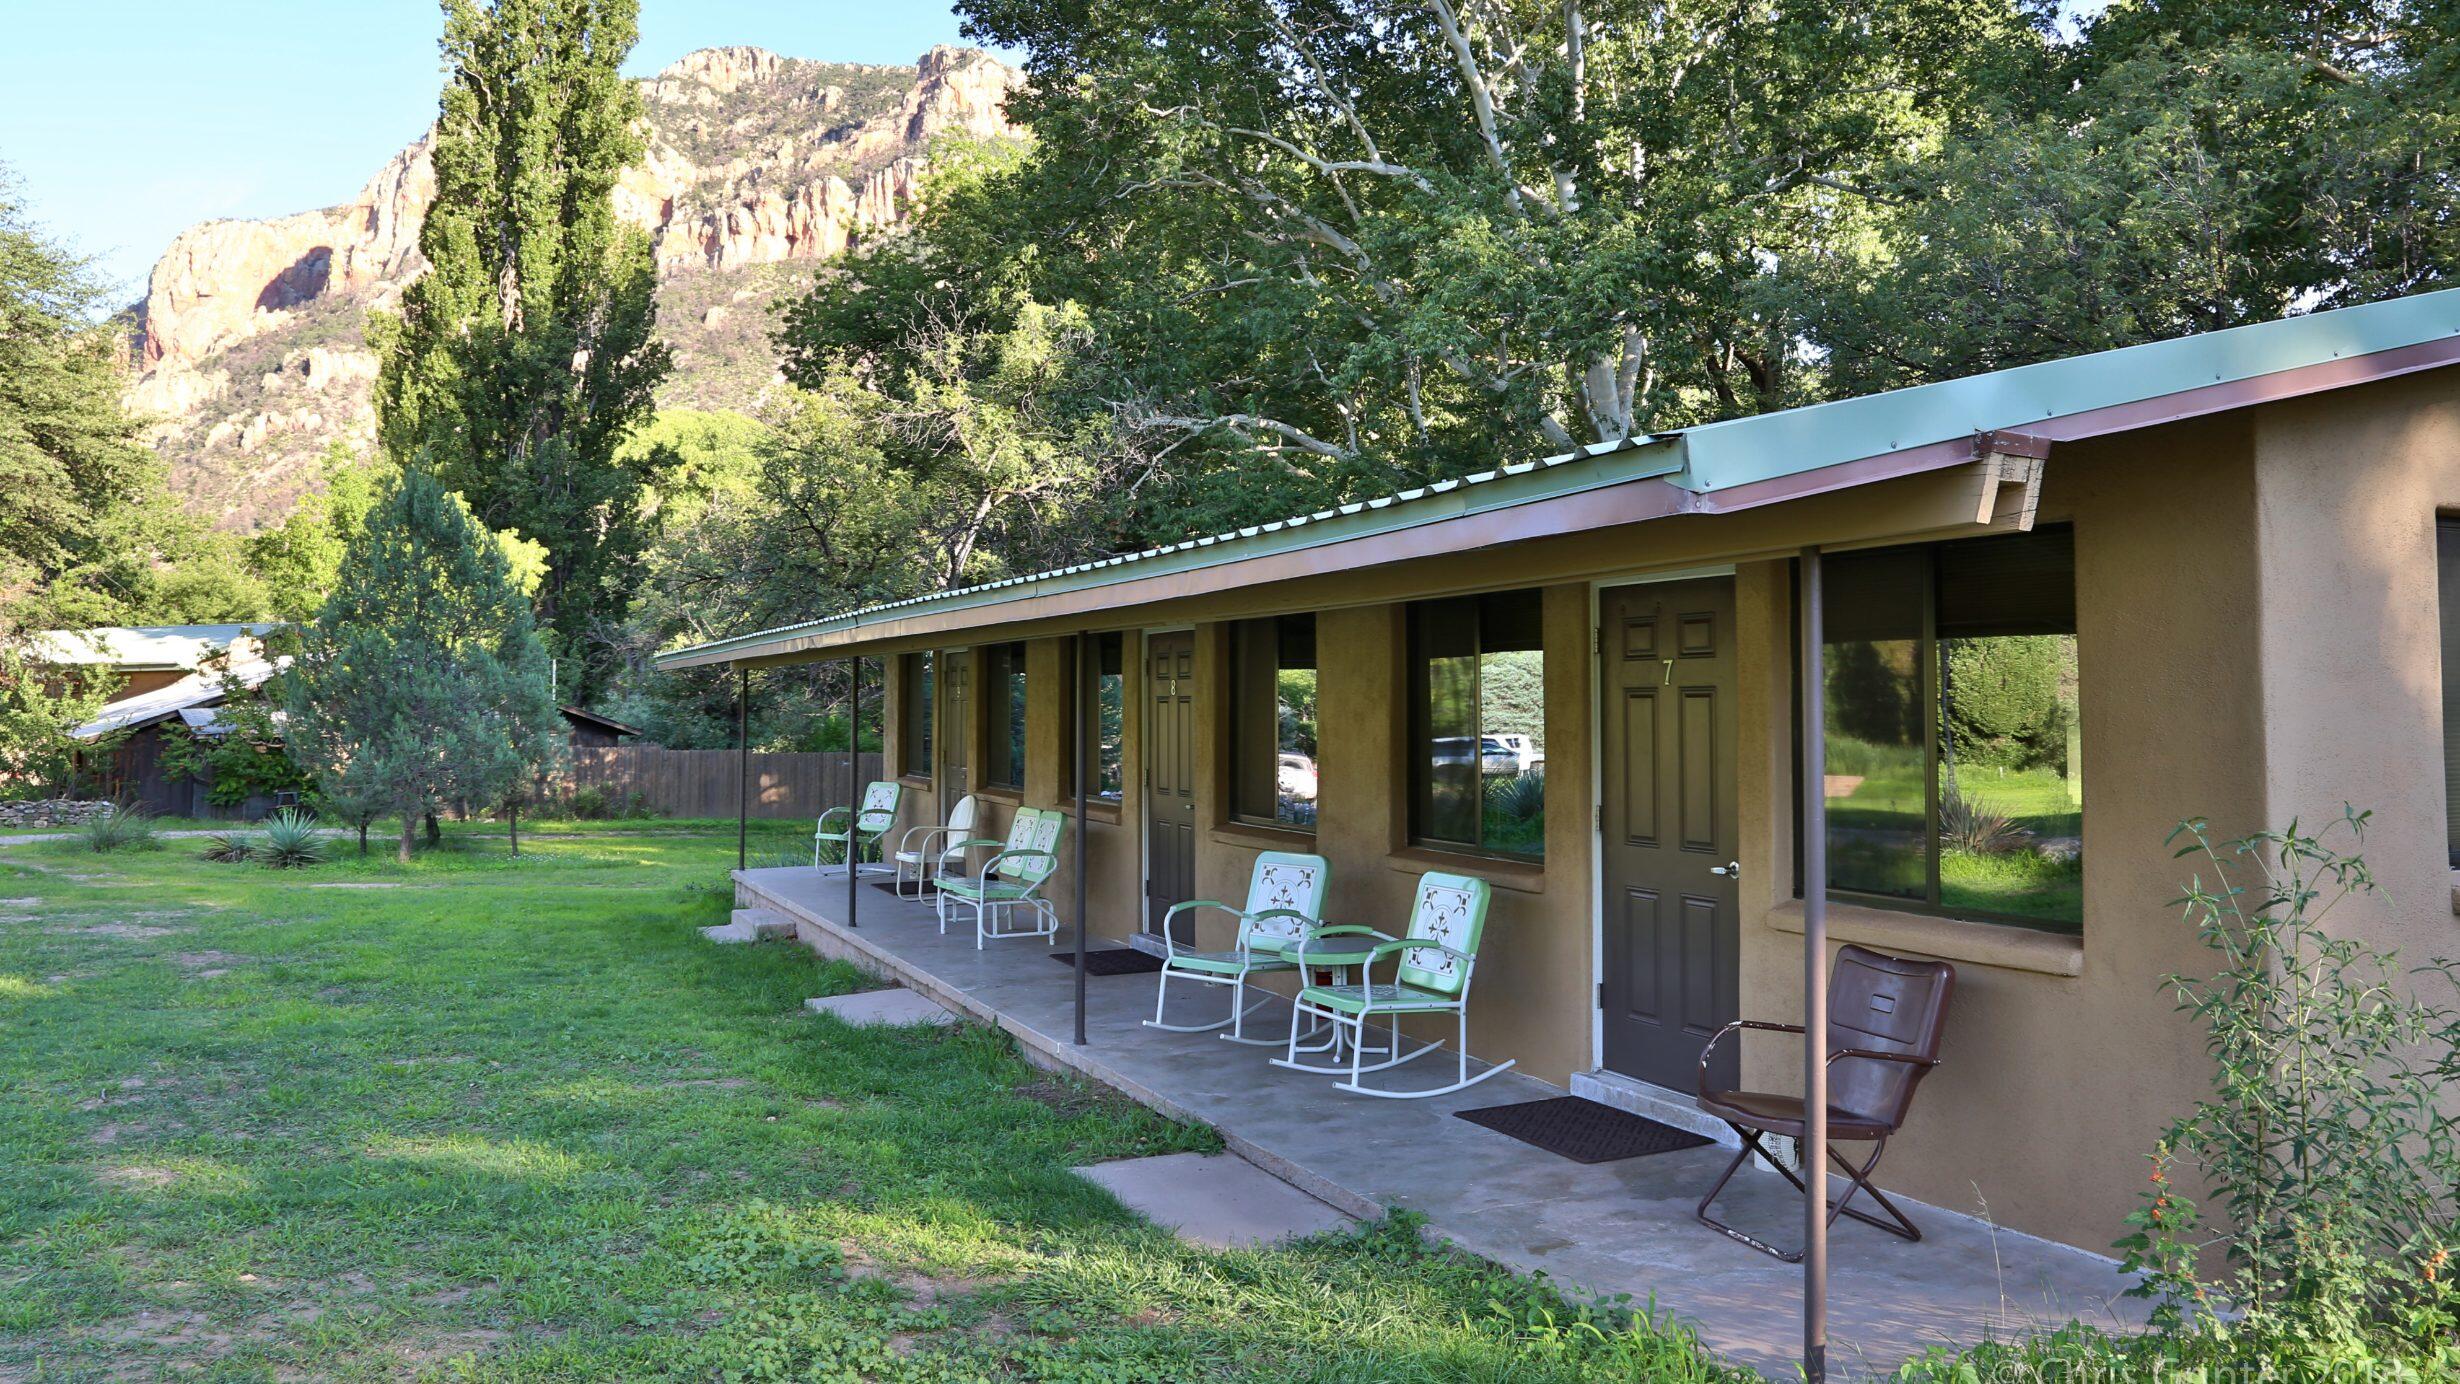 Porch with metal chairs in front of lodging rooms with trees and mountains in the background